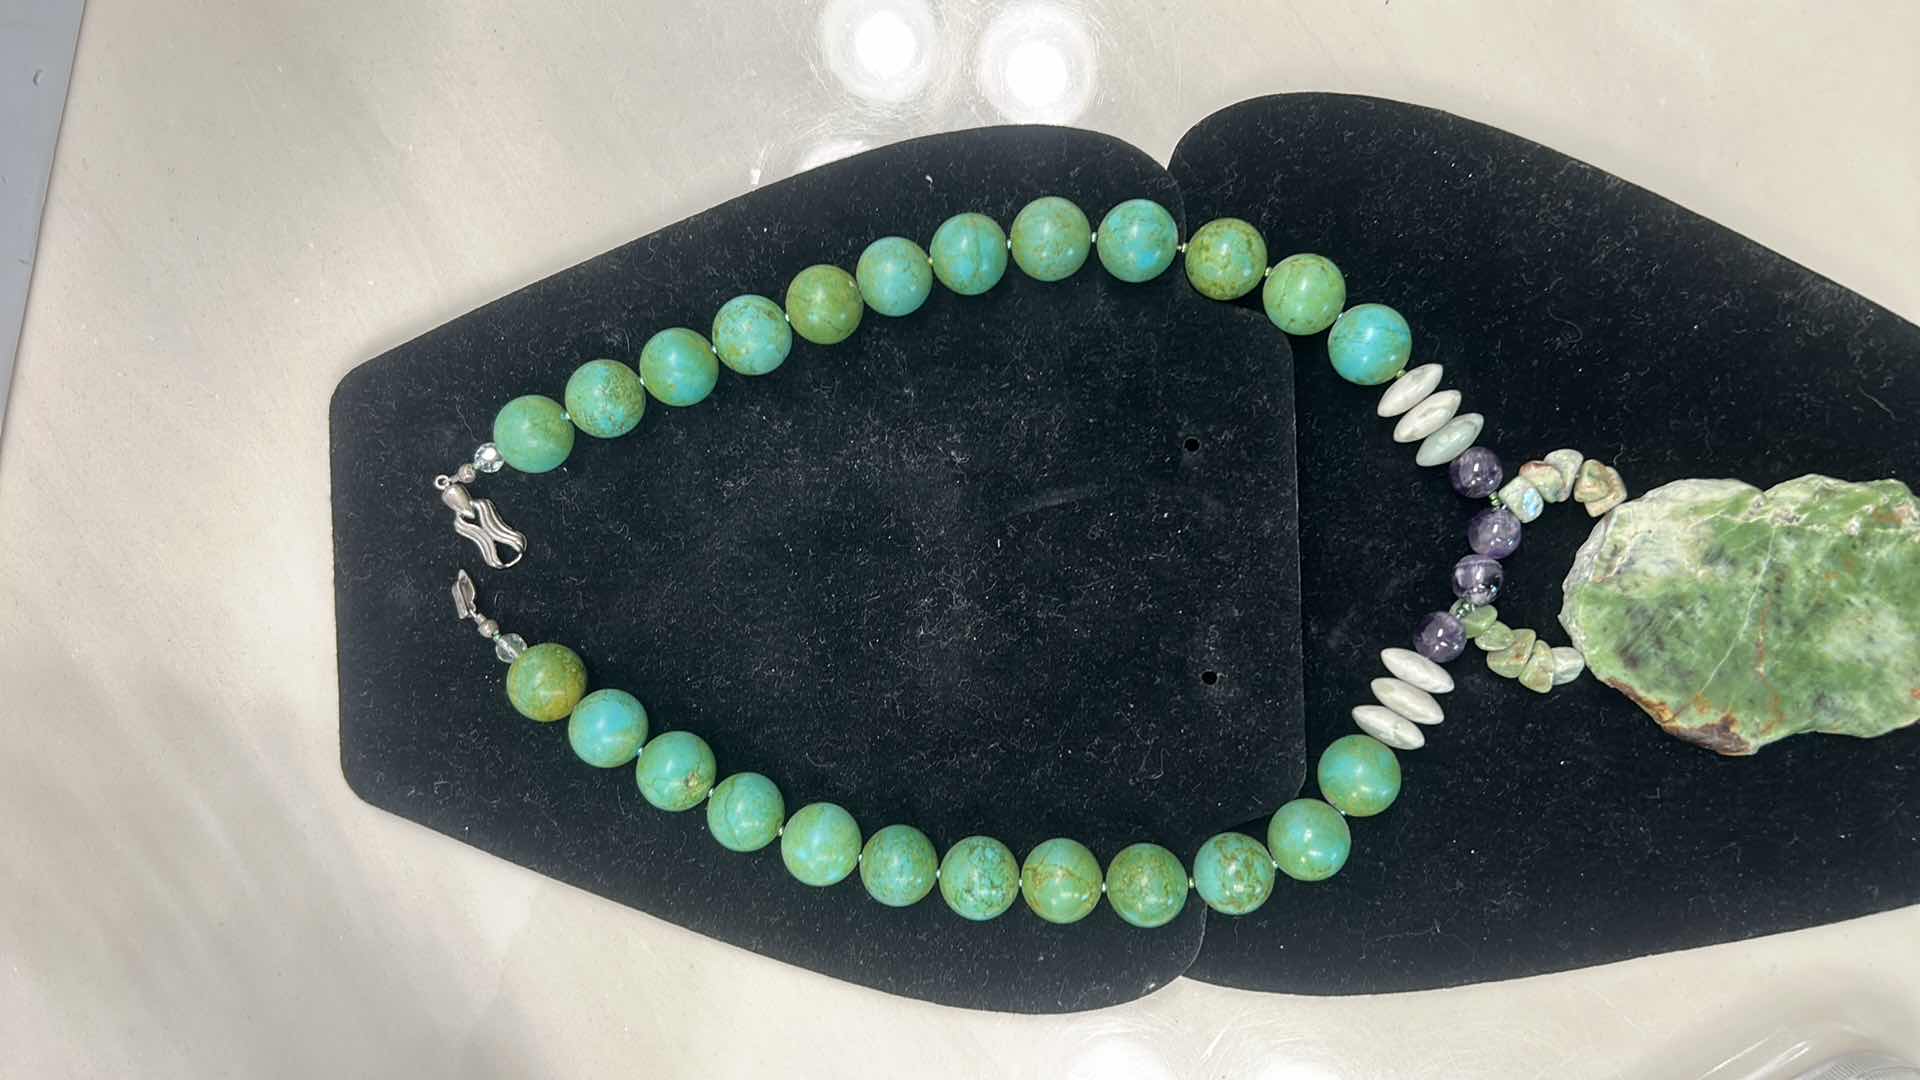 Photo 3 of STUNNING STONE NECKLACE, JADE MEASURES 2 1/4” x 3 1/4” ROUND 1/2” CHRYSOPRASE BEADS